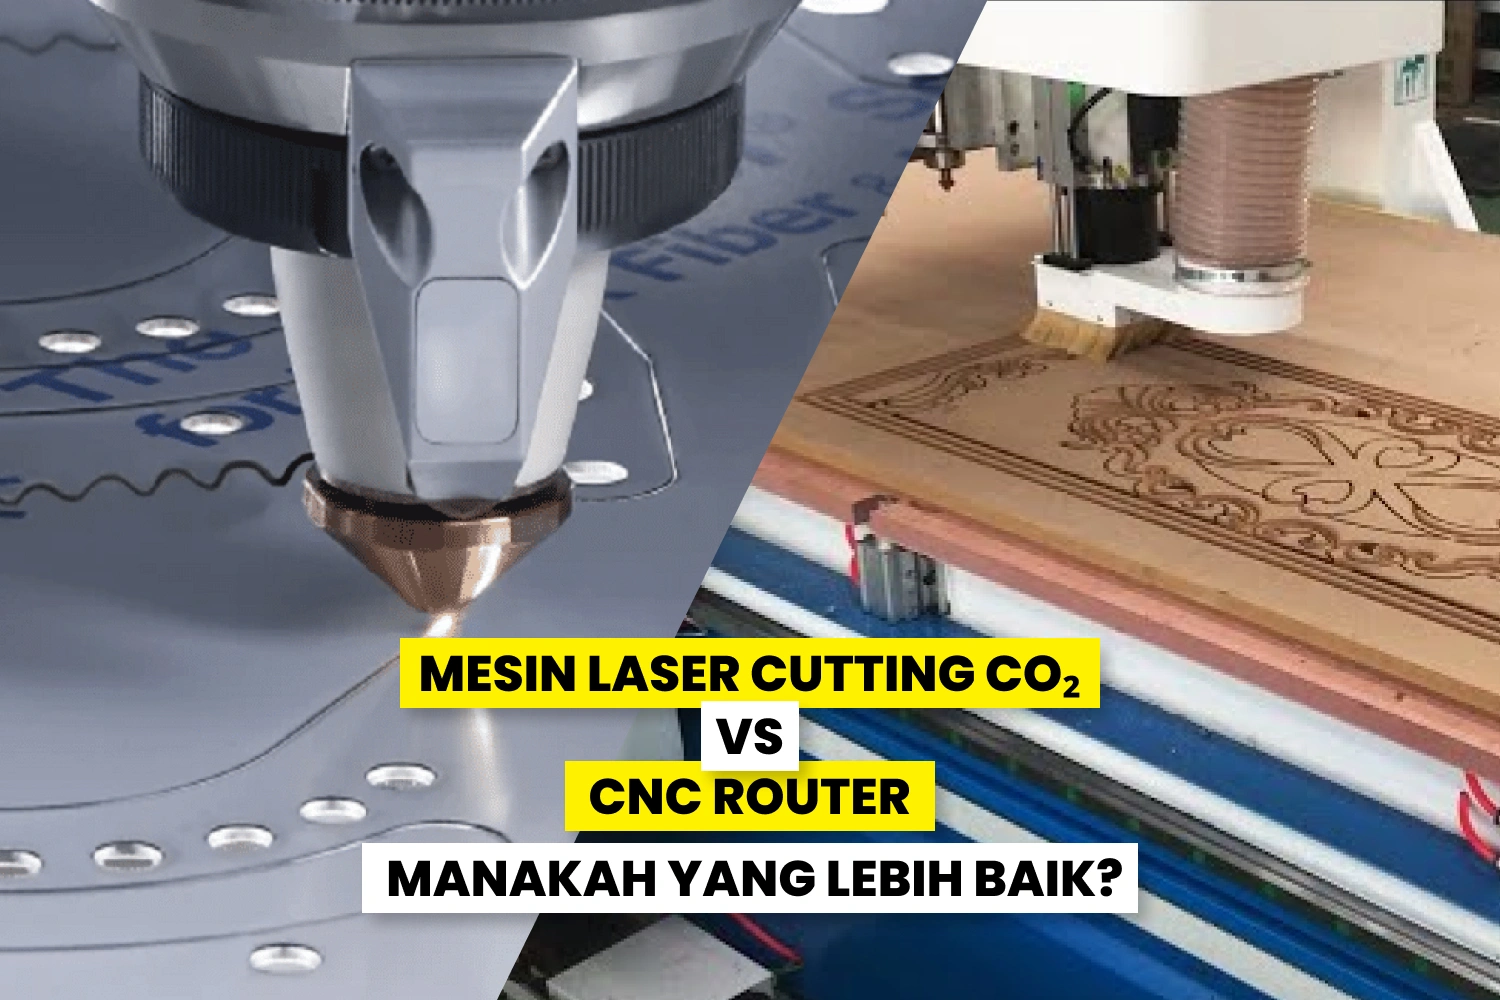 Mesin Laser Cutting Co₂ Vs Cnc Router.